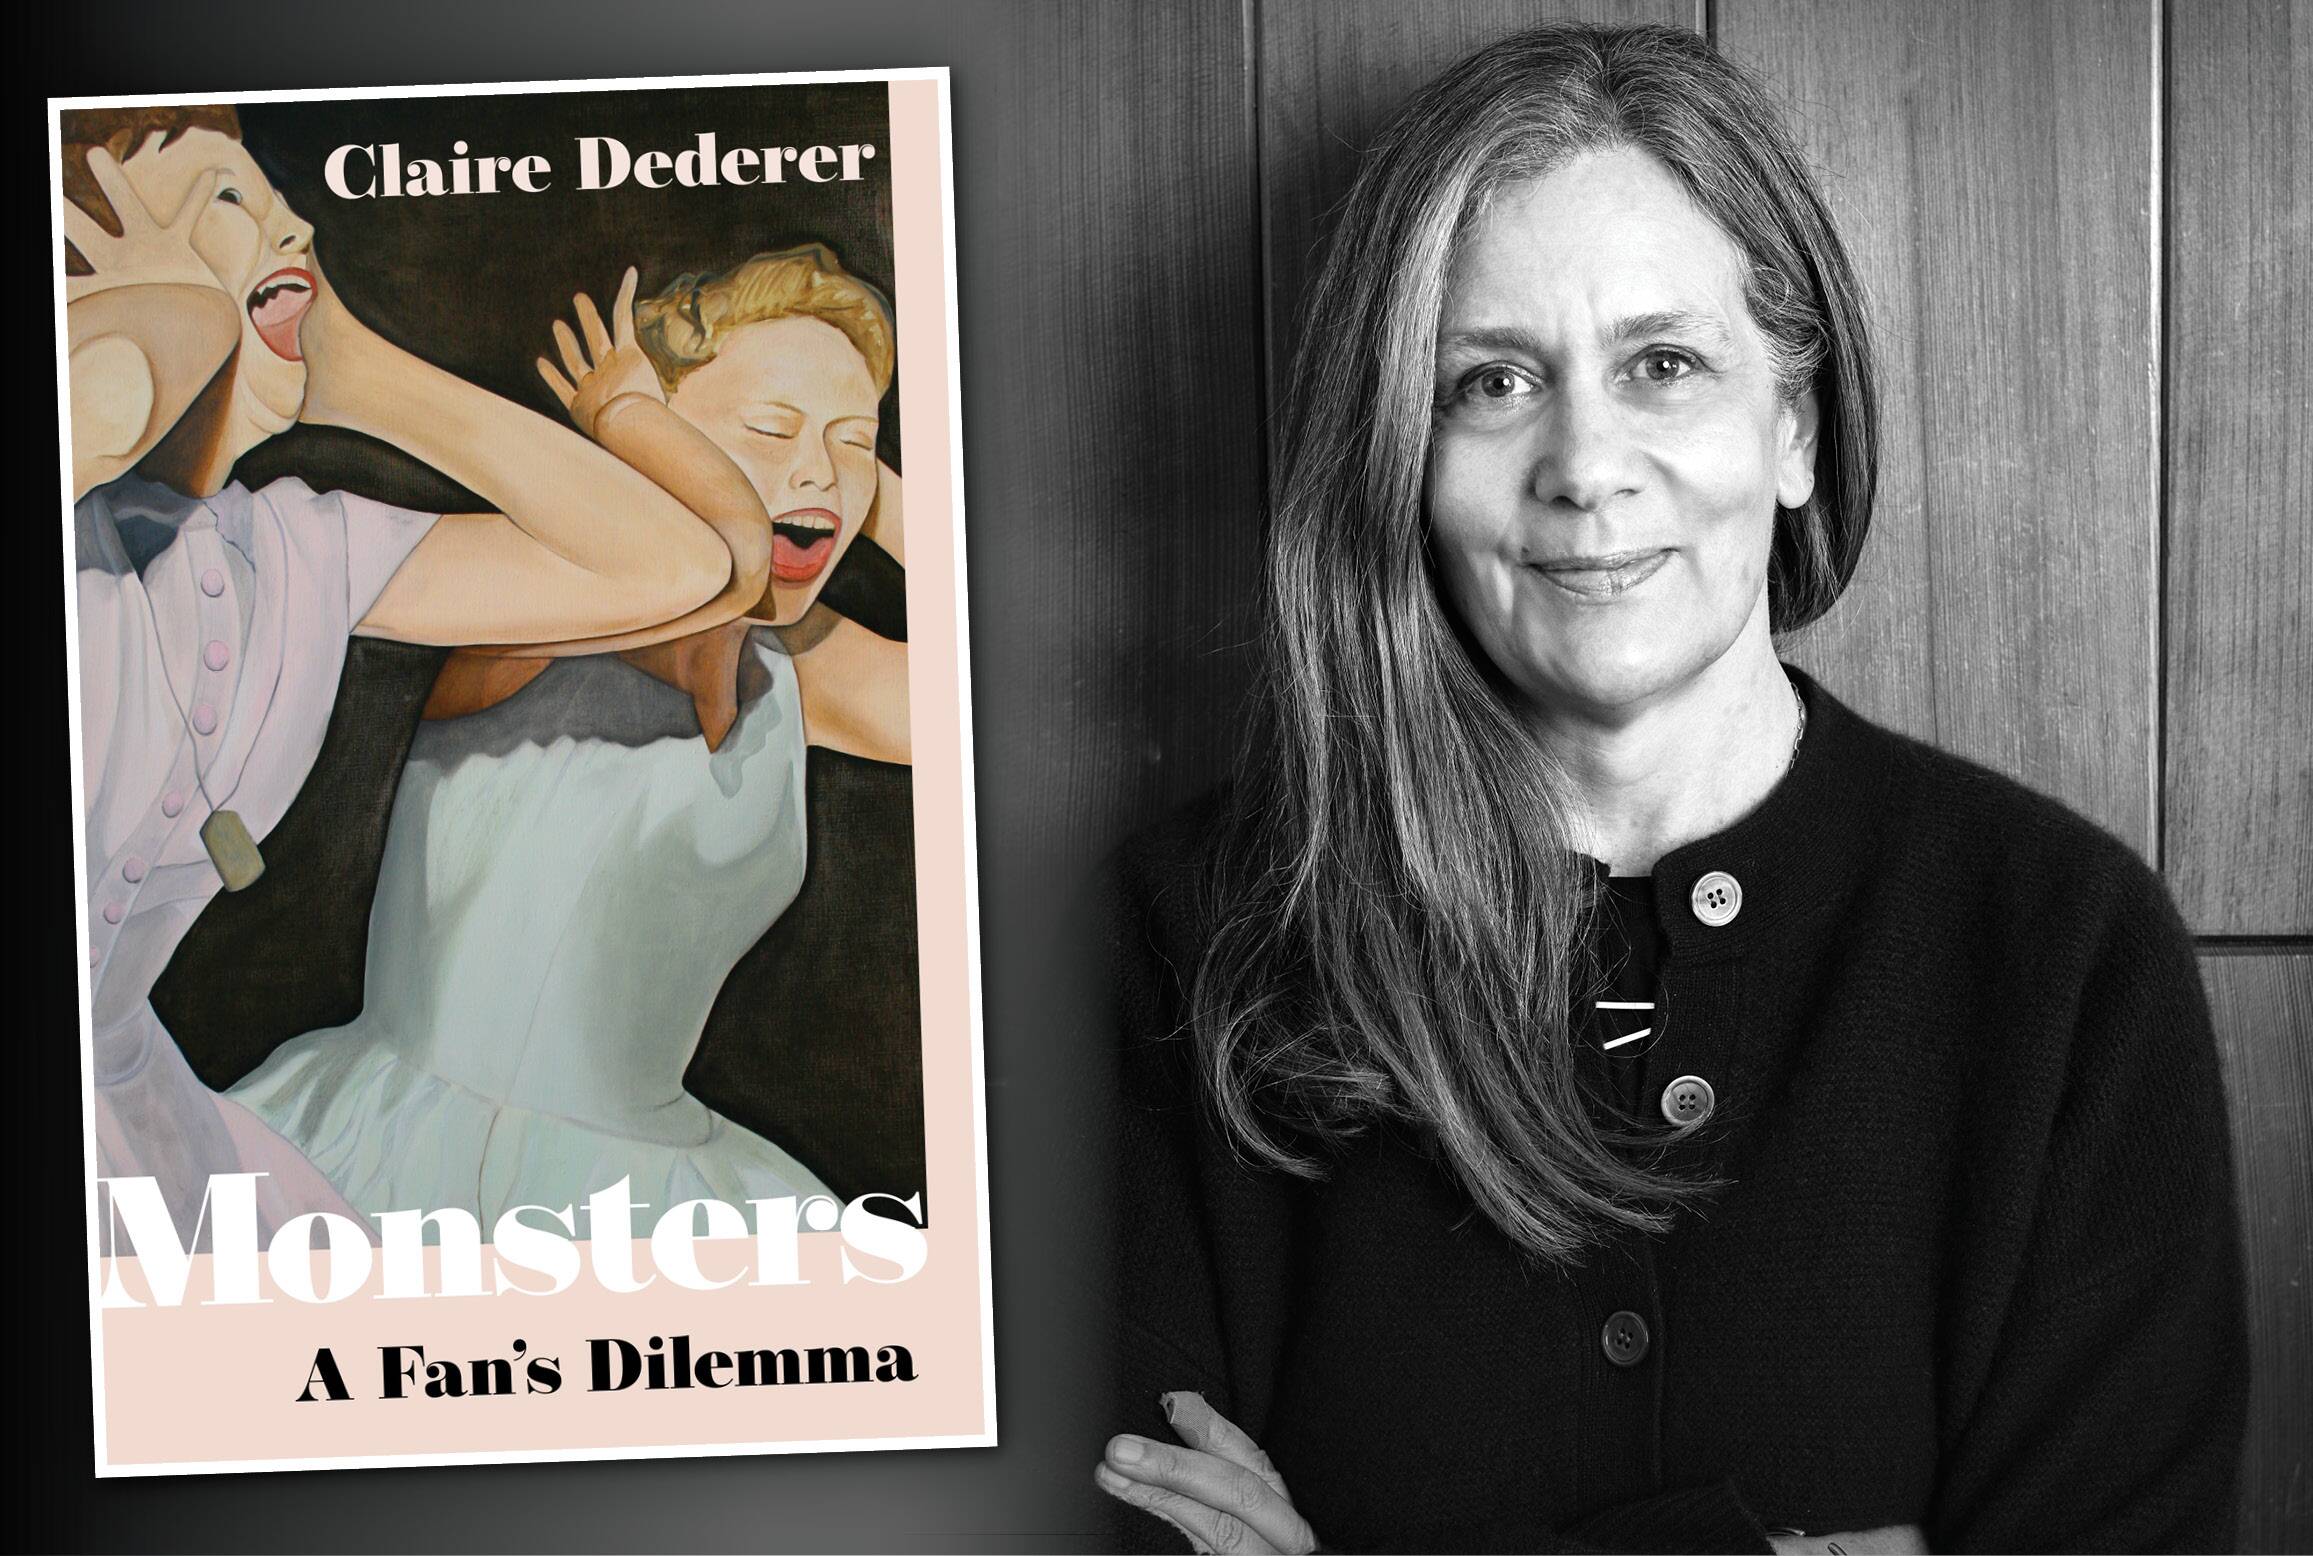 Book Review: 'Monsters: A Fan's Dilemma,' by Claire Dederer - The